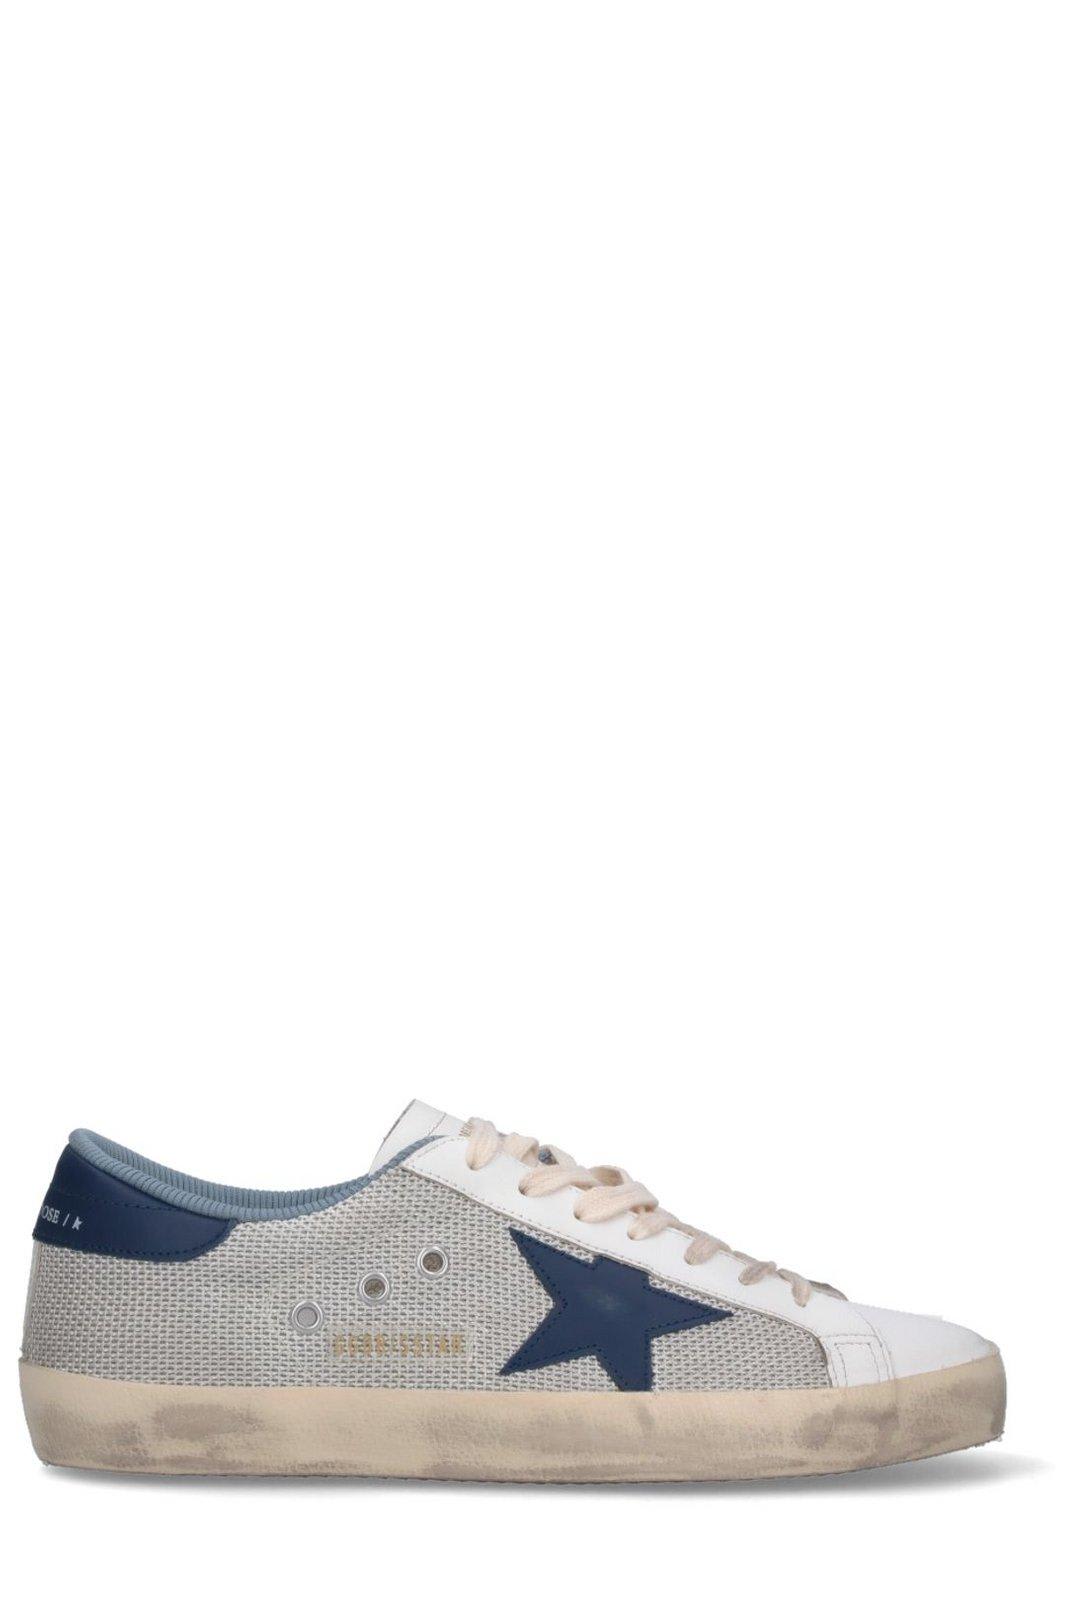 Shop Golden Goose Super Star Lace-up Sneakers In Multicolour